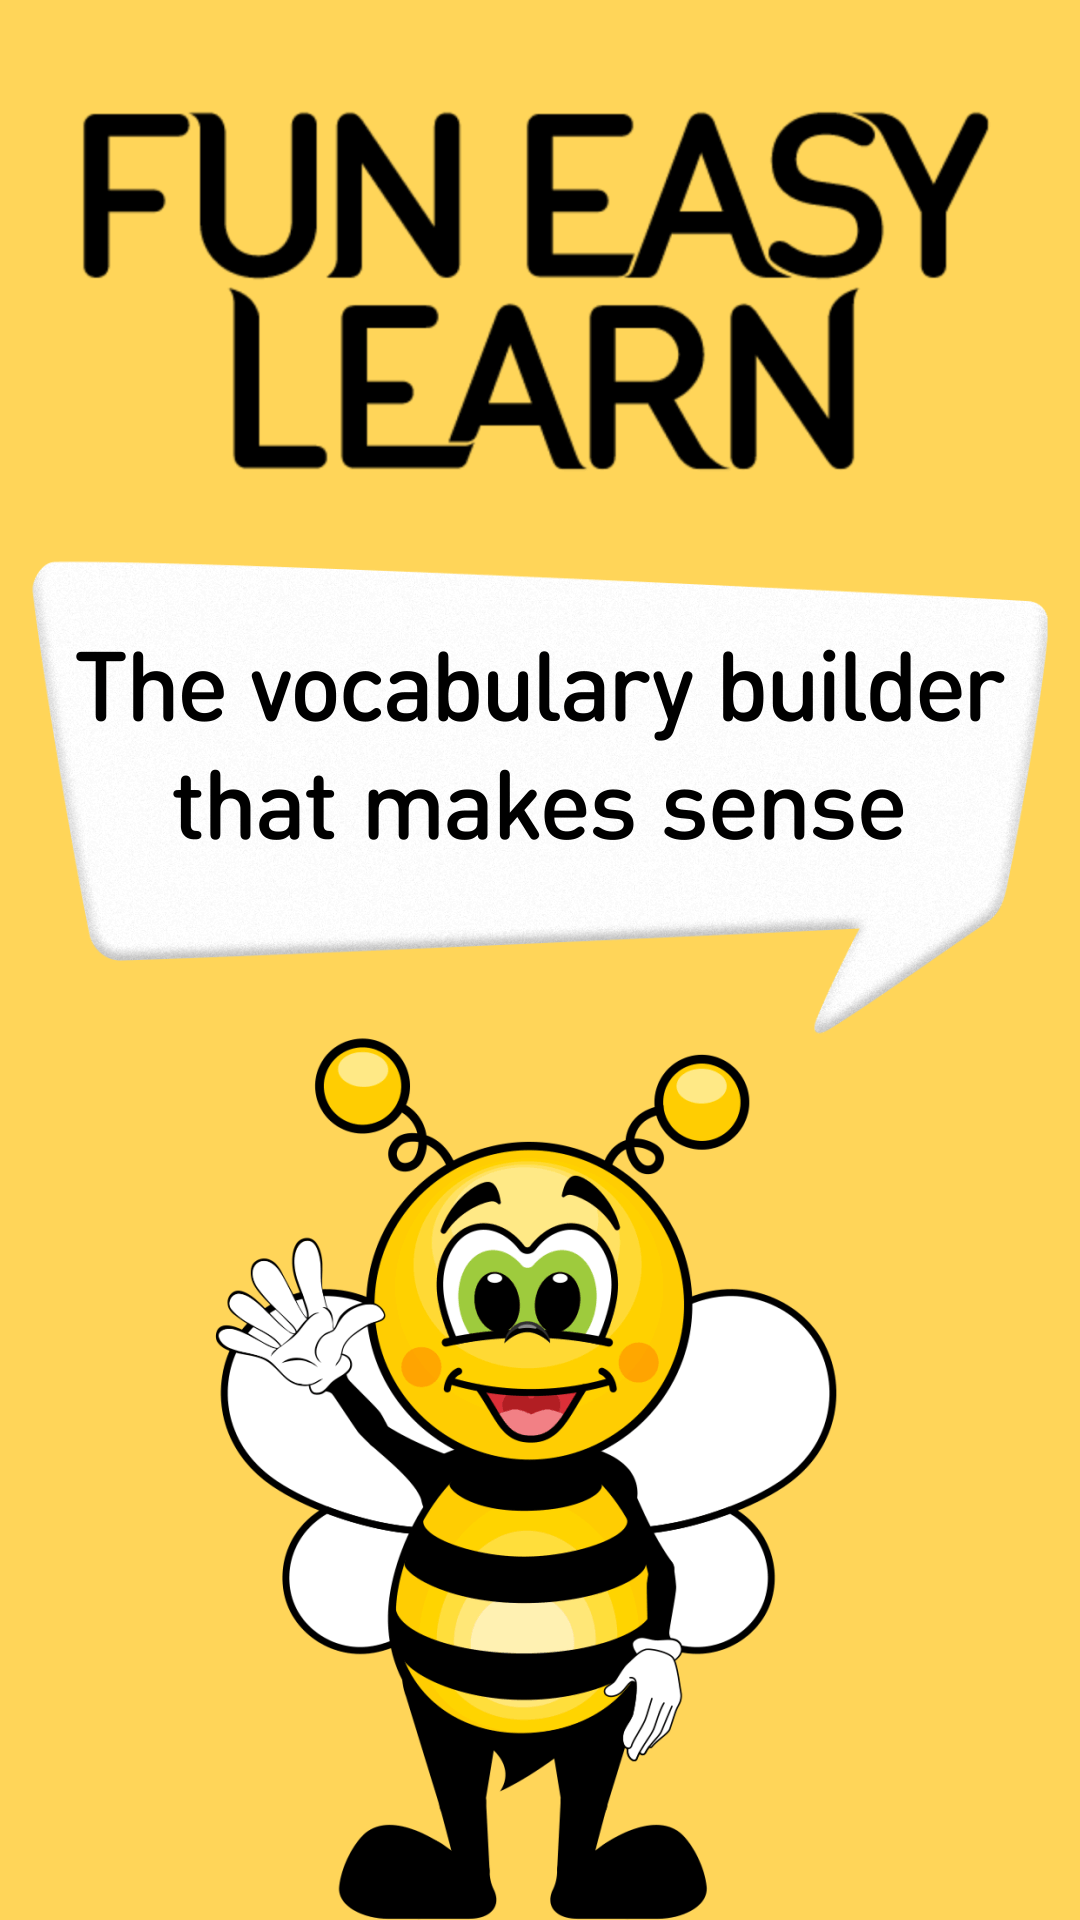 learning english is fun and easy